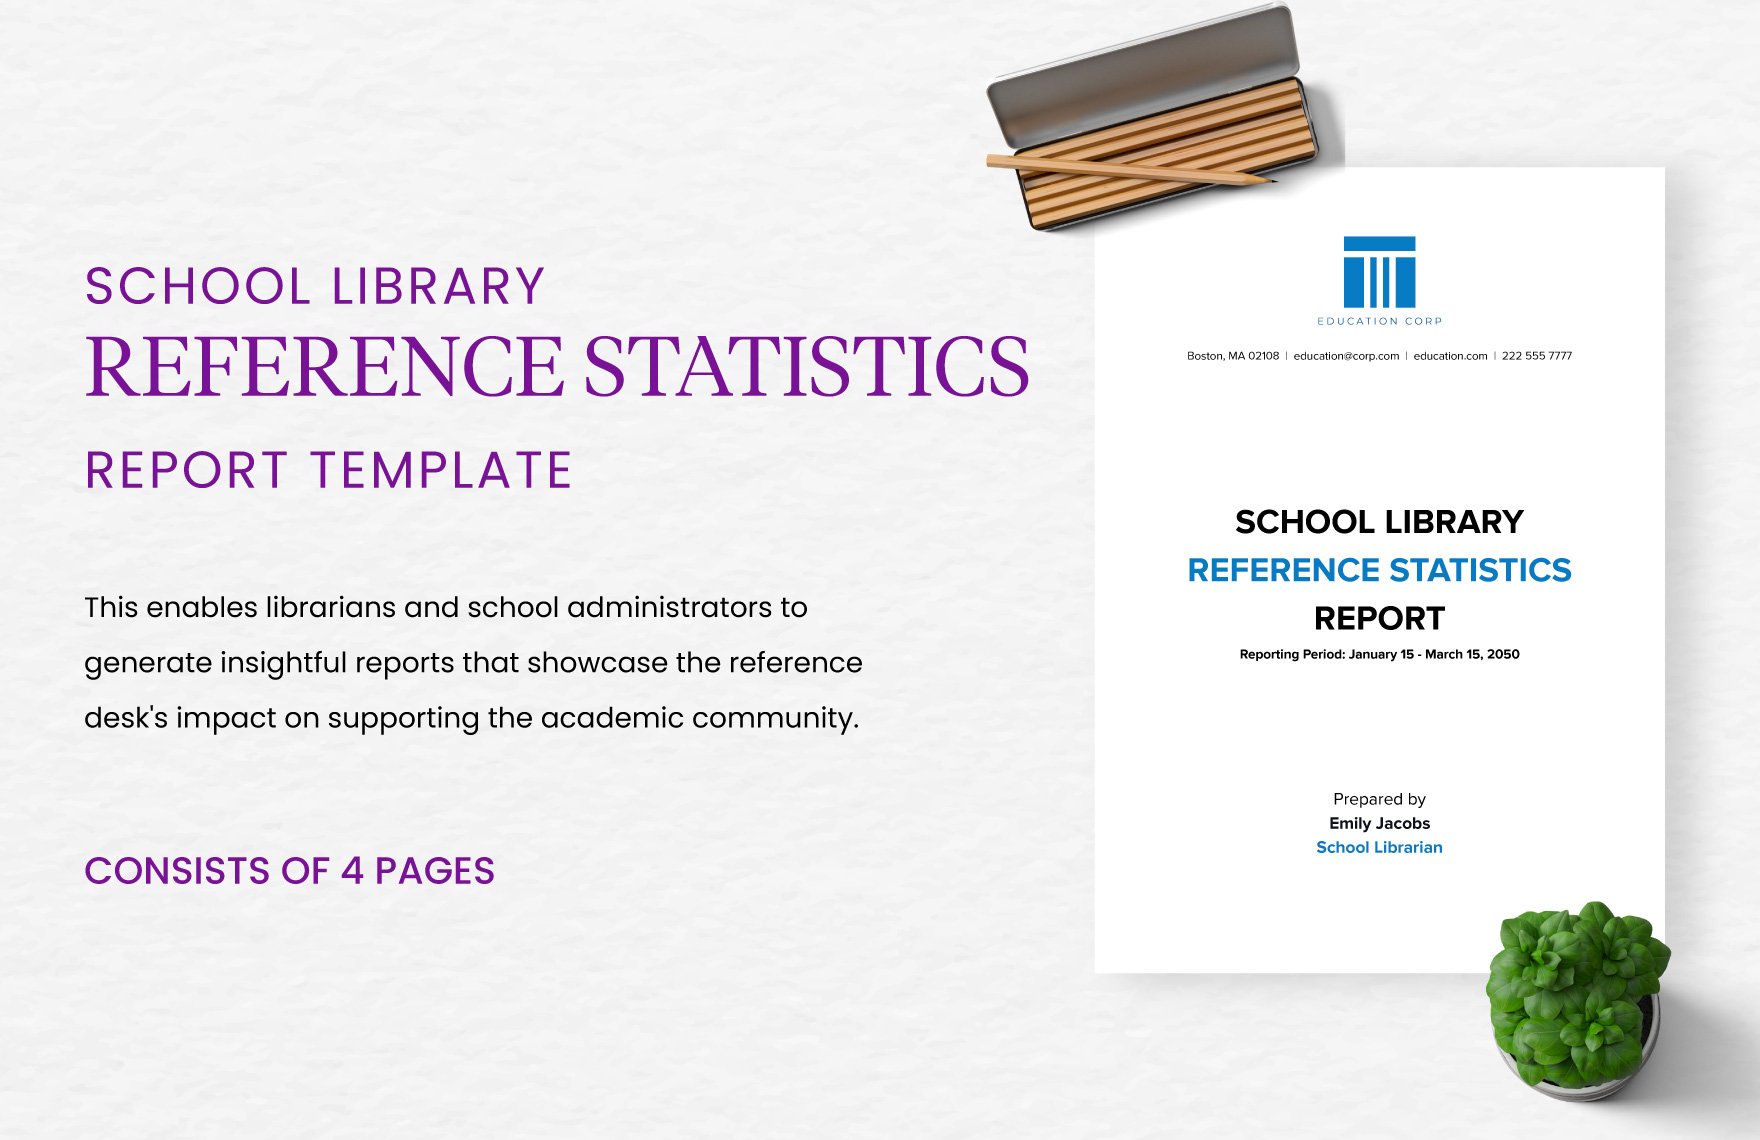 School Library Reference Statistics Report Template